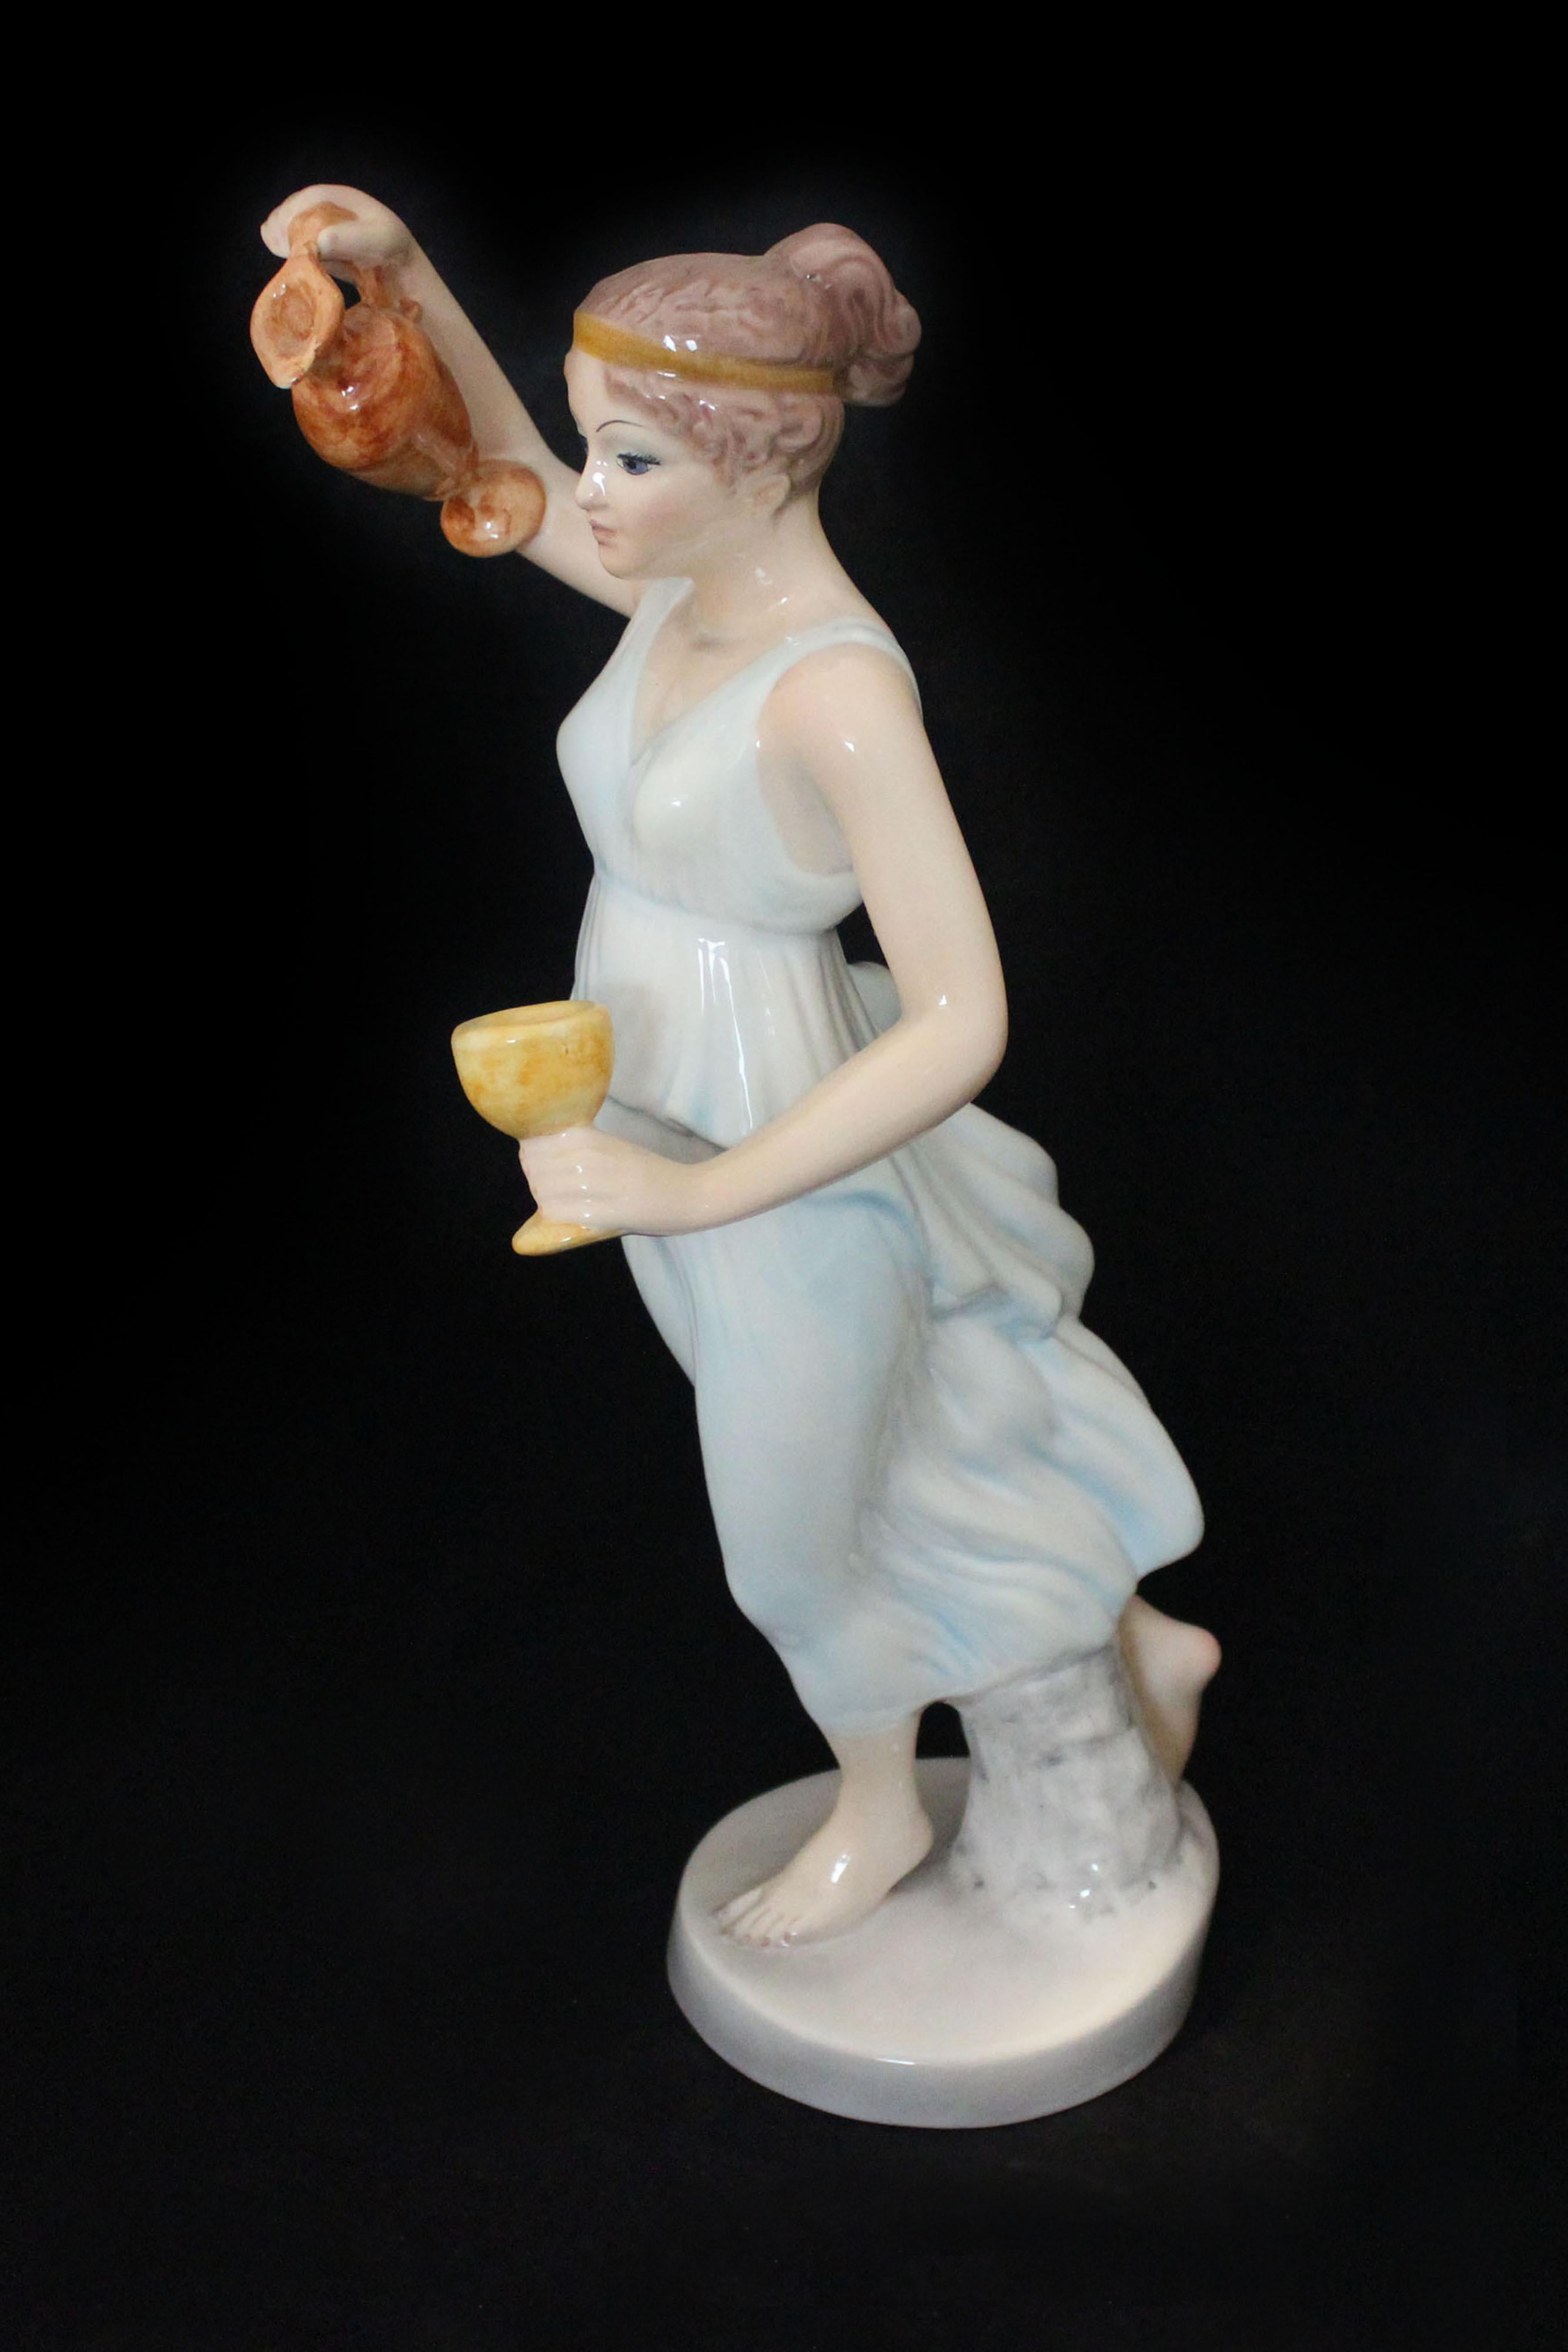 Vestal ceramic figure with jug and goblet by Giovanni Ronzan for Ronzan.
